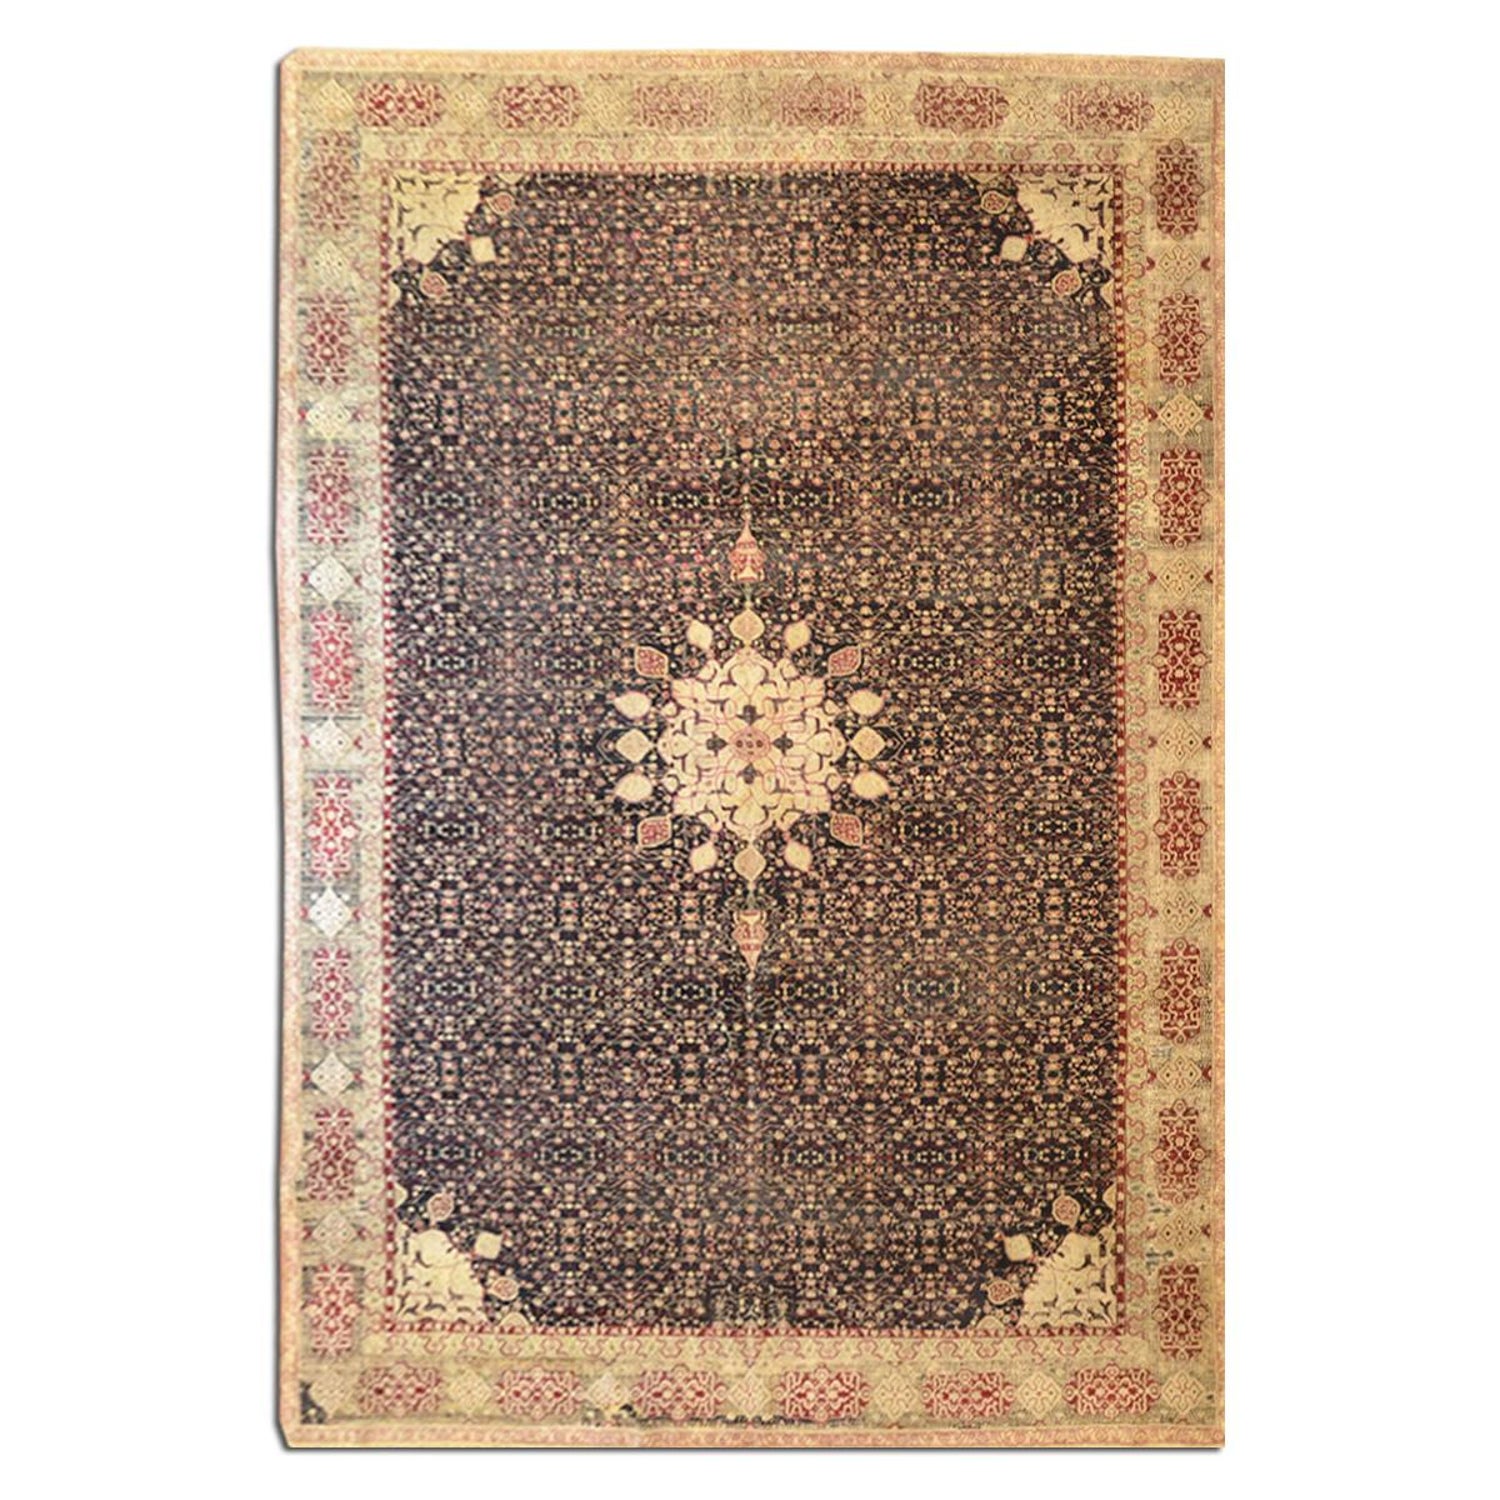 Wool Handmade Antique Indian Agra Rug with Medallion Design. 3.50 x 2.70 m.  For Sale at 1stDibs